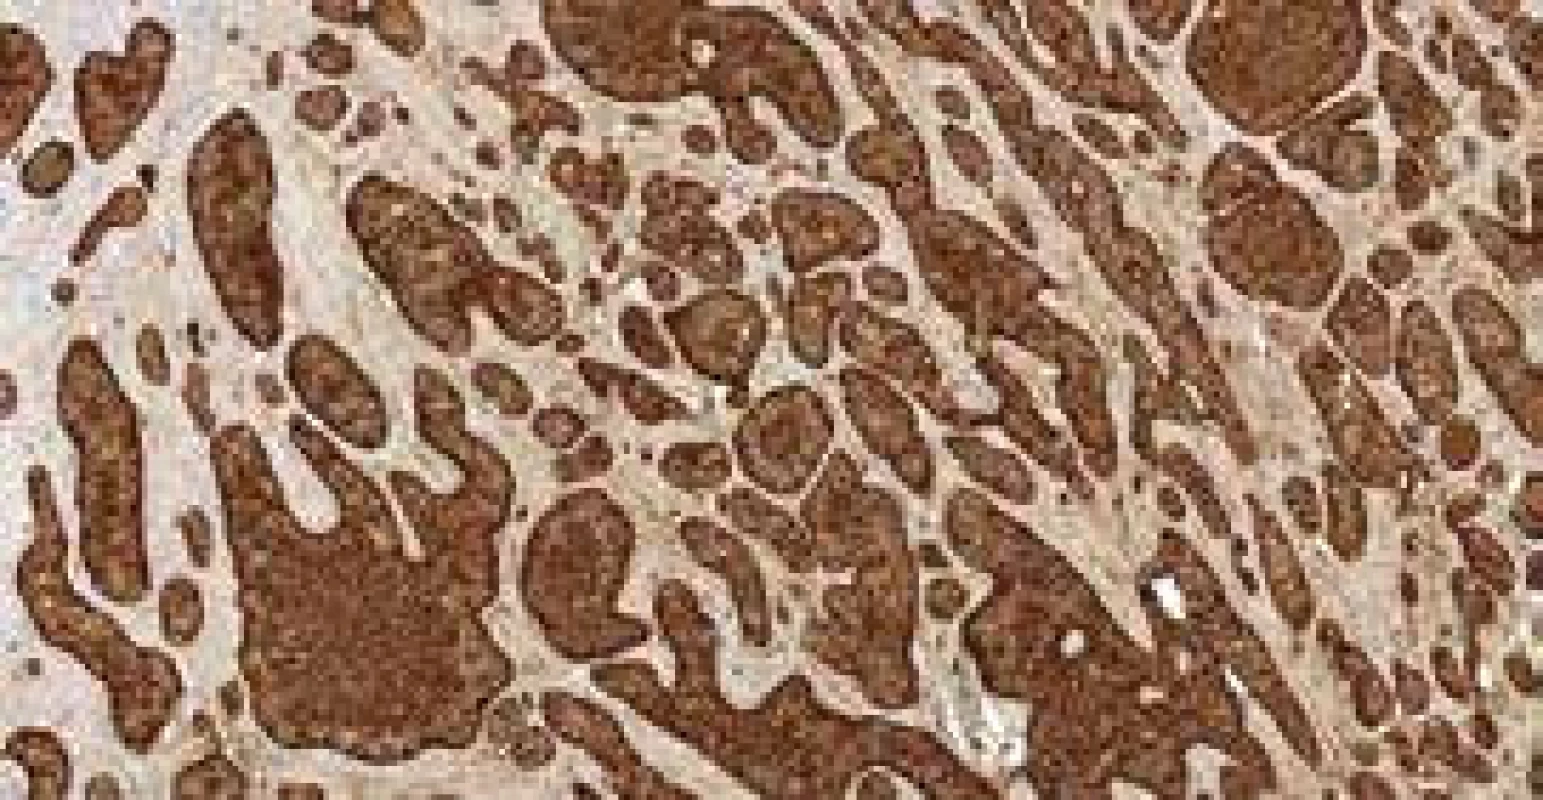 a. Histological section: Solid, insular masses
of monotonous small round cells positive
for chromogranin, immunohistochemical
staining, 200×